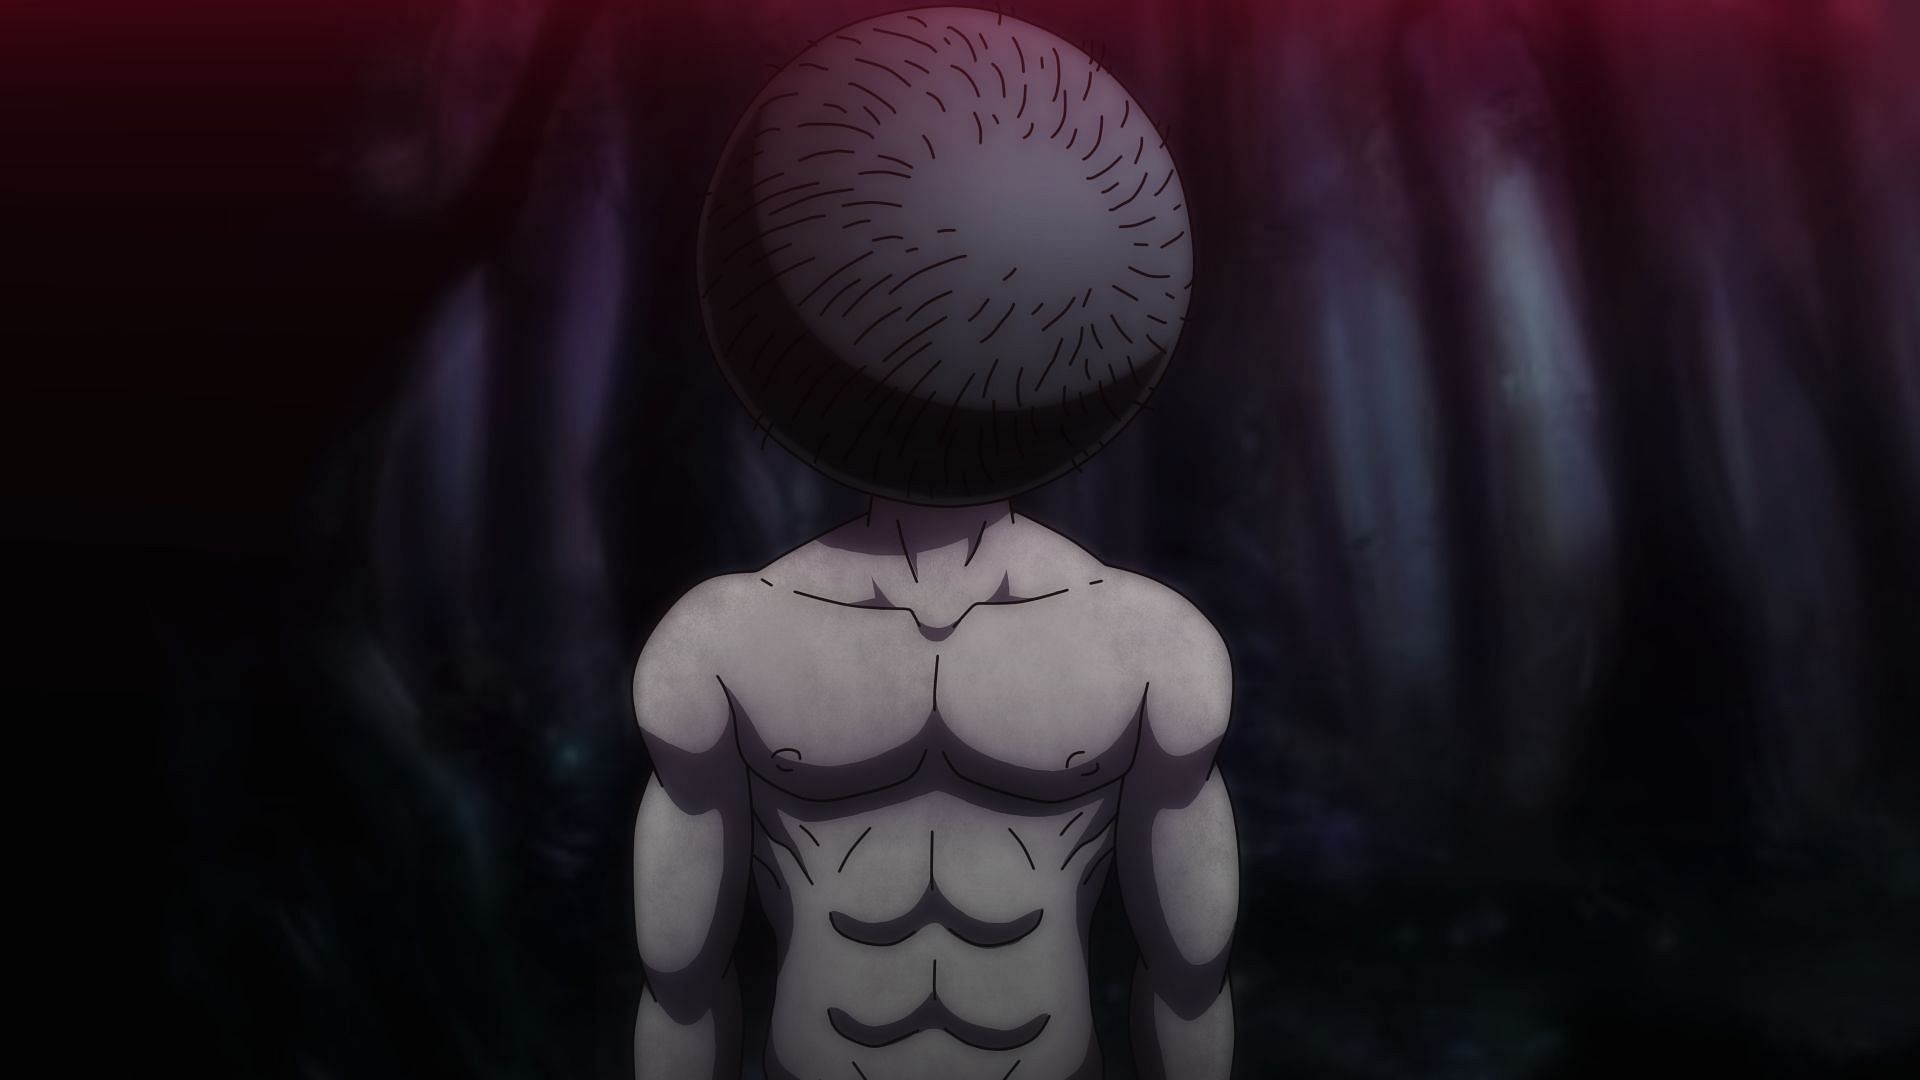 Ging Freecss Discovers The Dark Continent's Secret & All Ancient Threats  Explained (Hunter x Hunter) 